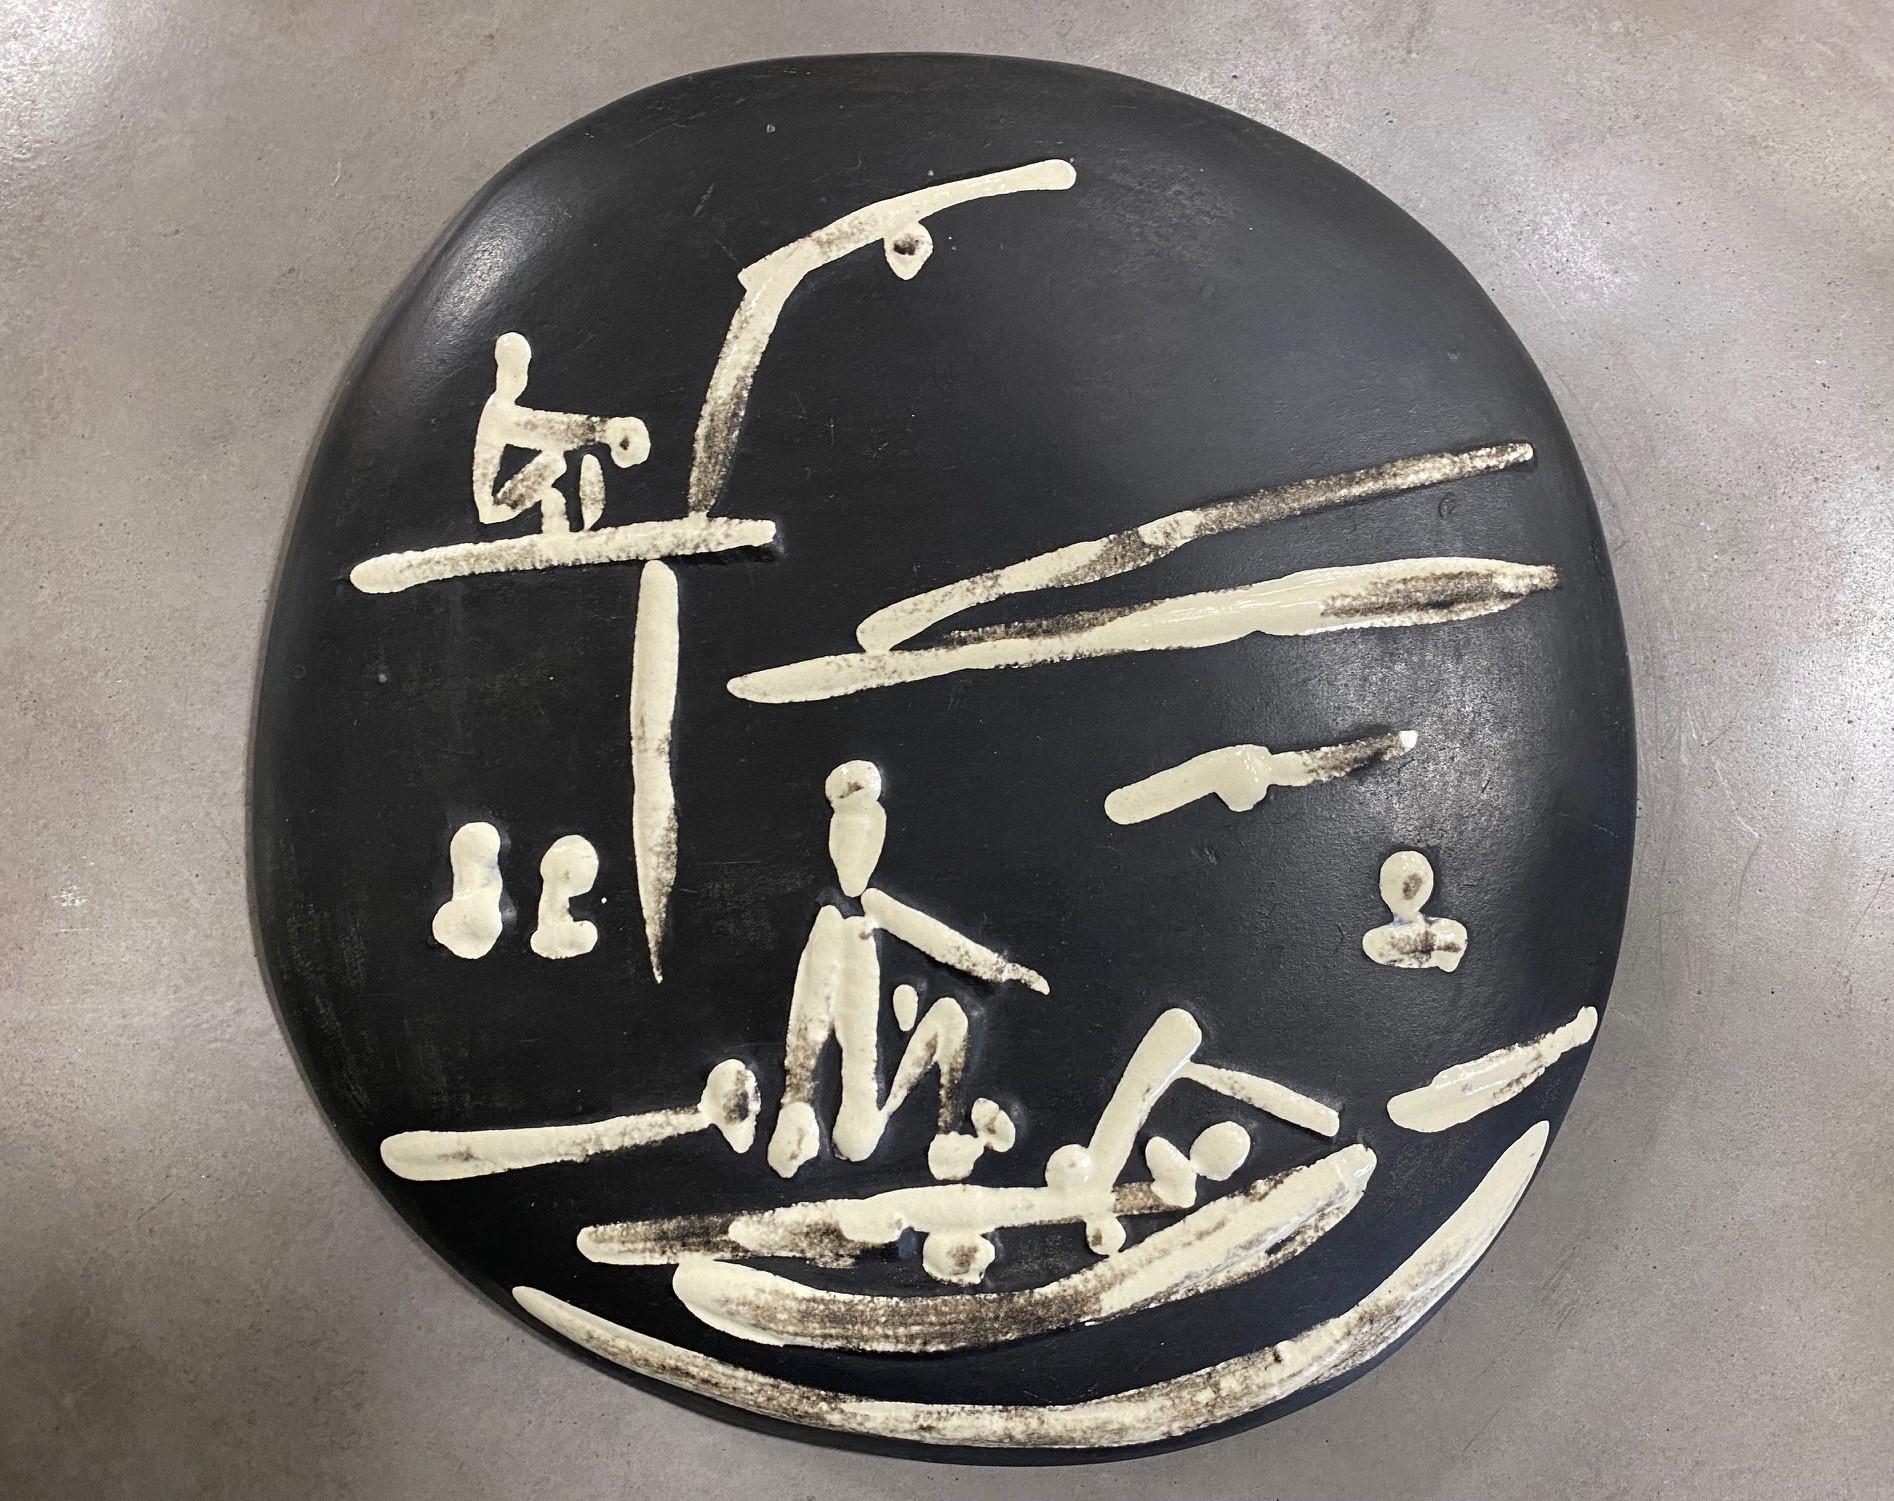 A wonderful, original ceramic plate by famed artist Pablo Picasso titled 